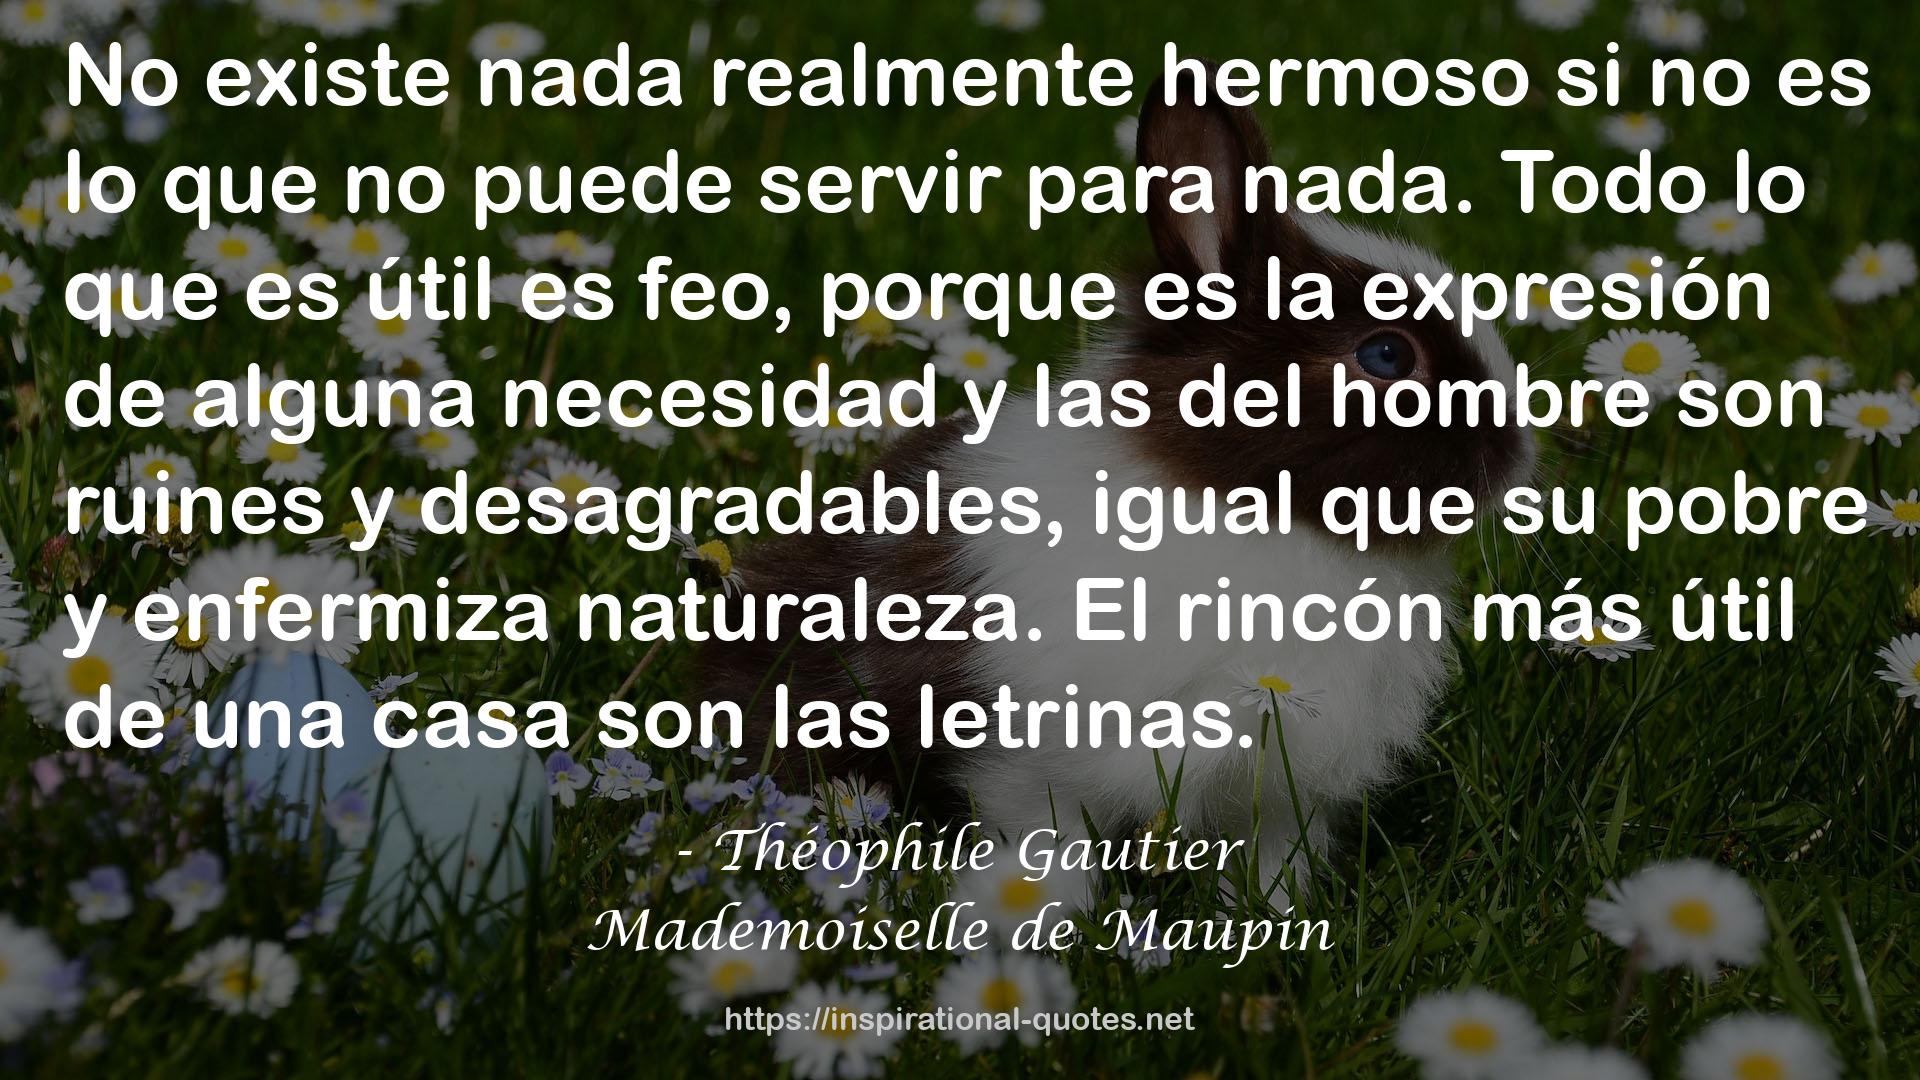 Mademoiselle de Maupin QUOTES